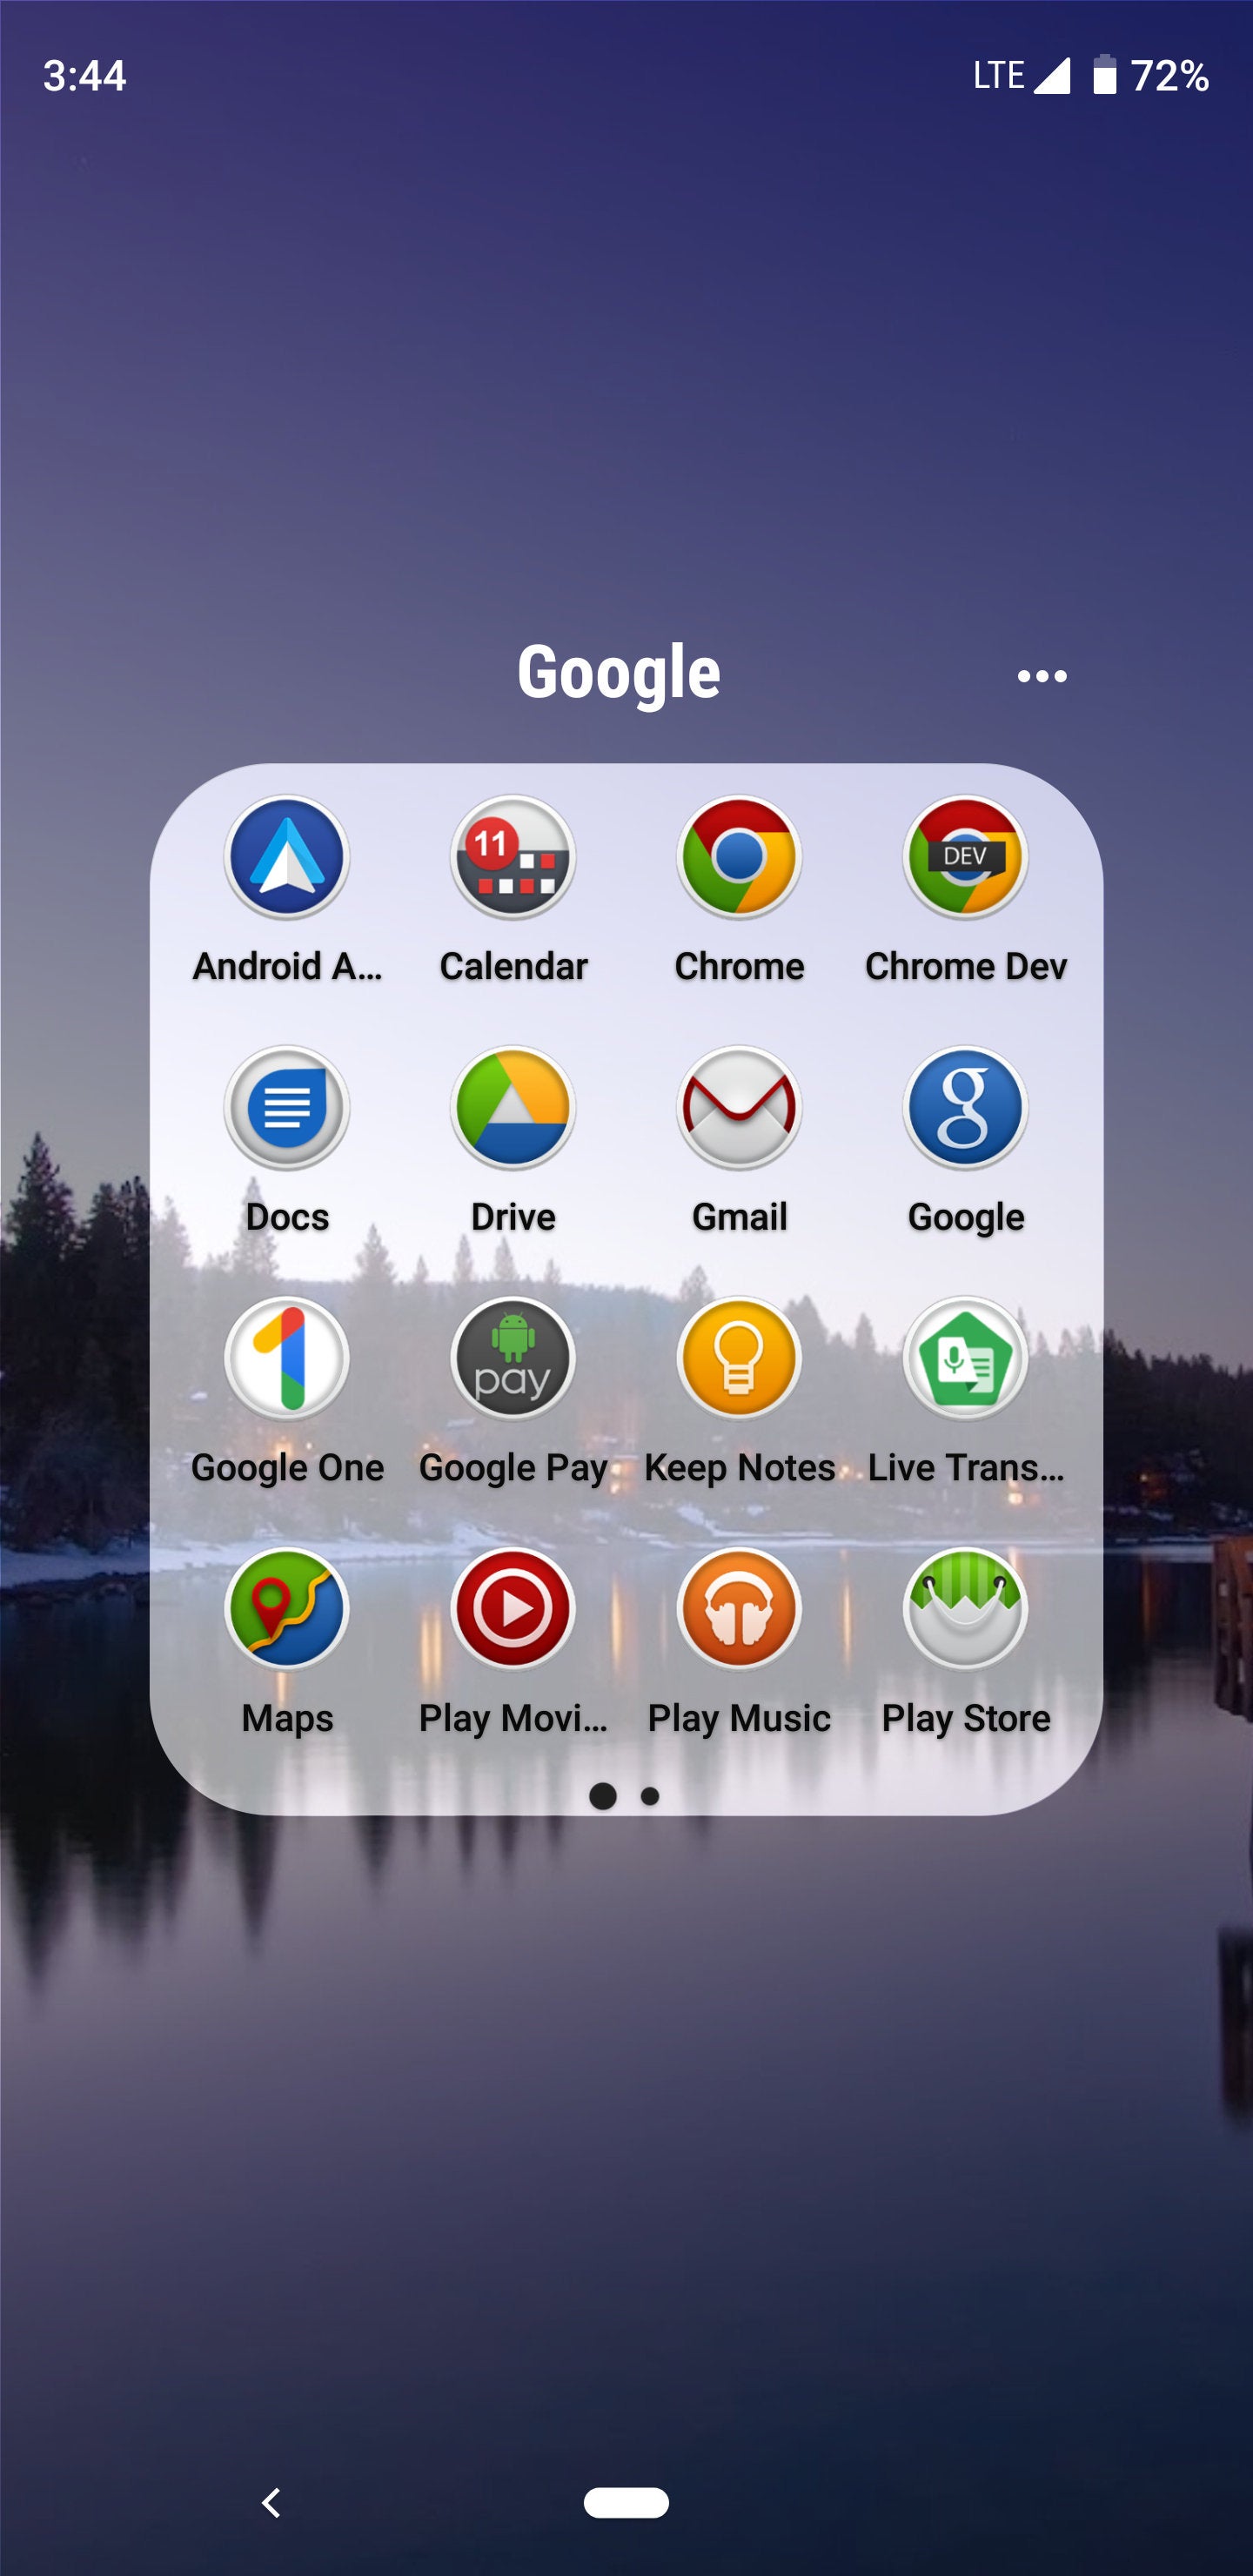 Nova Launcher gets a major update to version 6.0, here is what's new